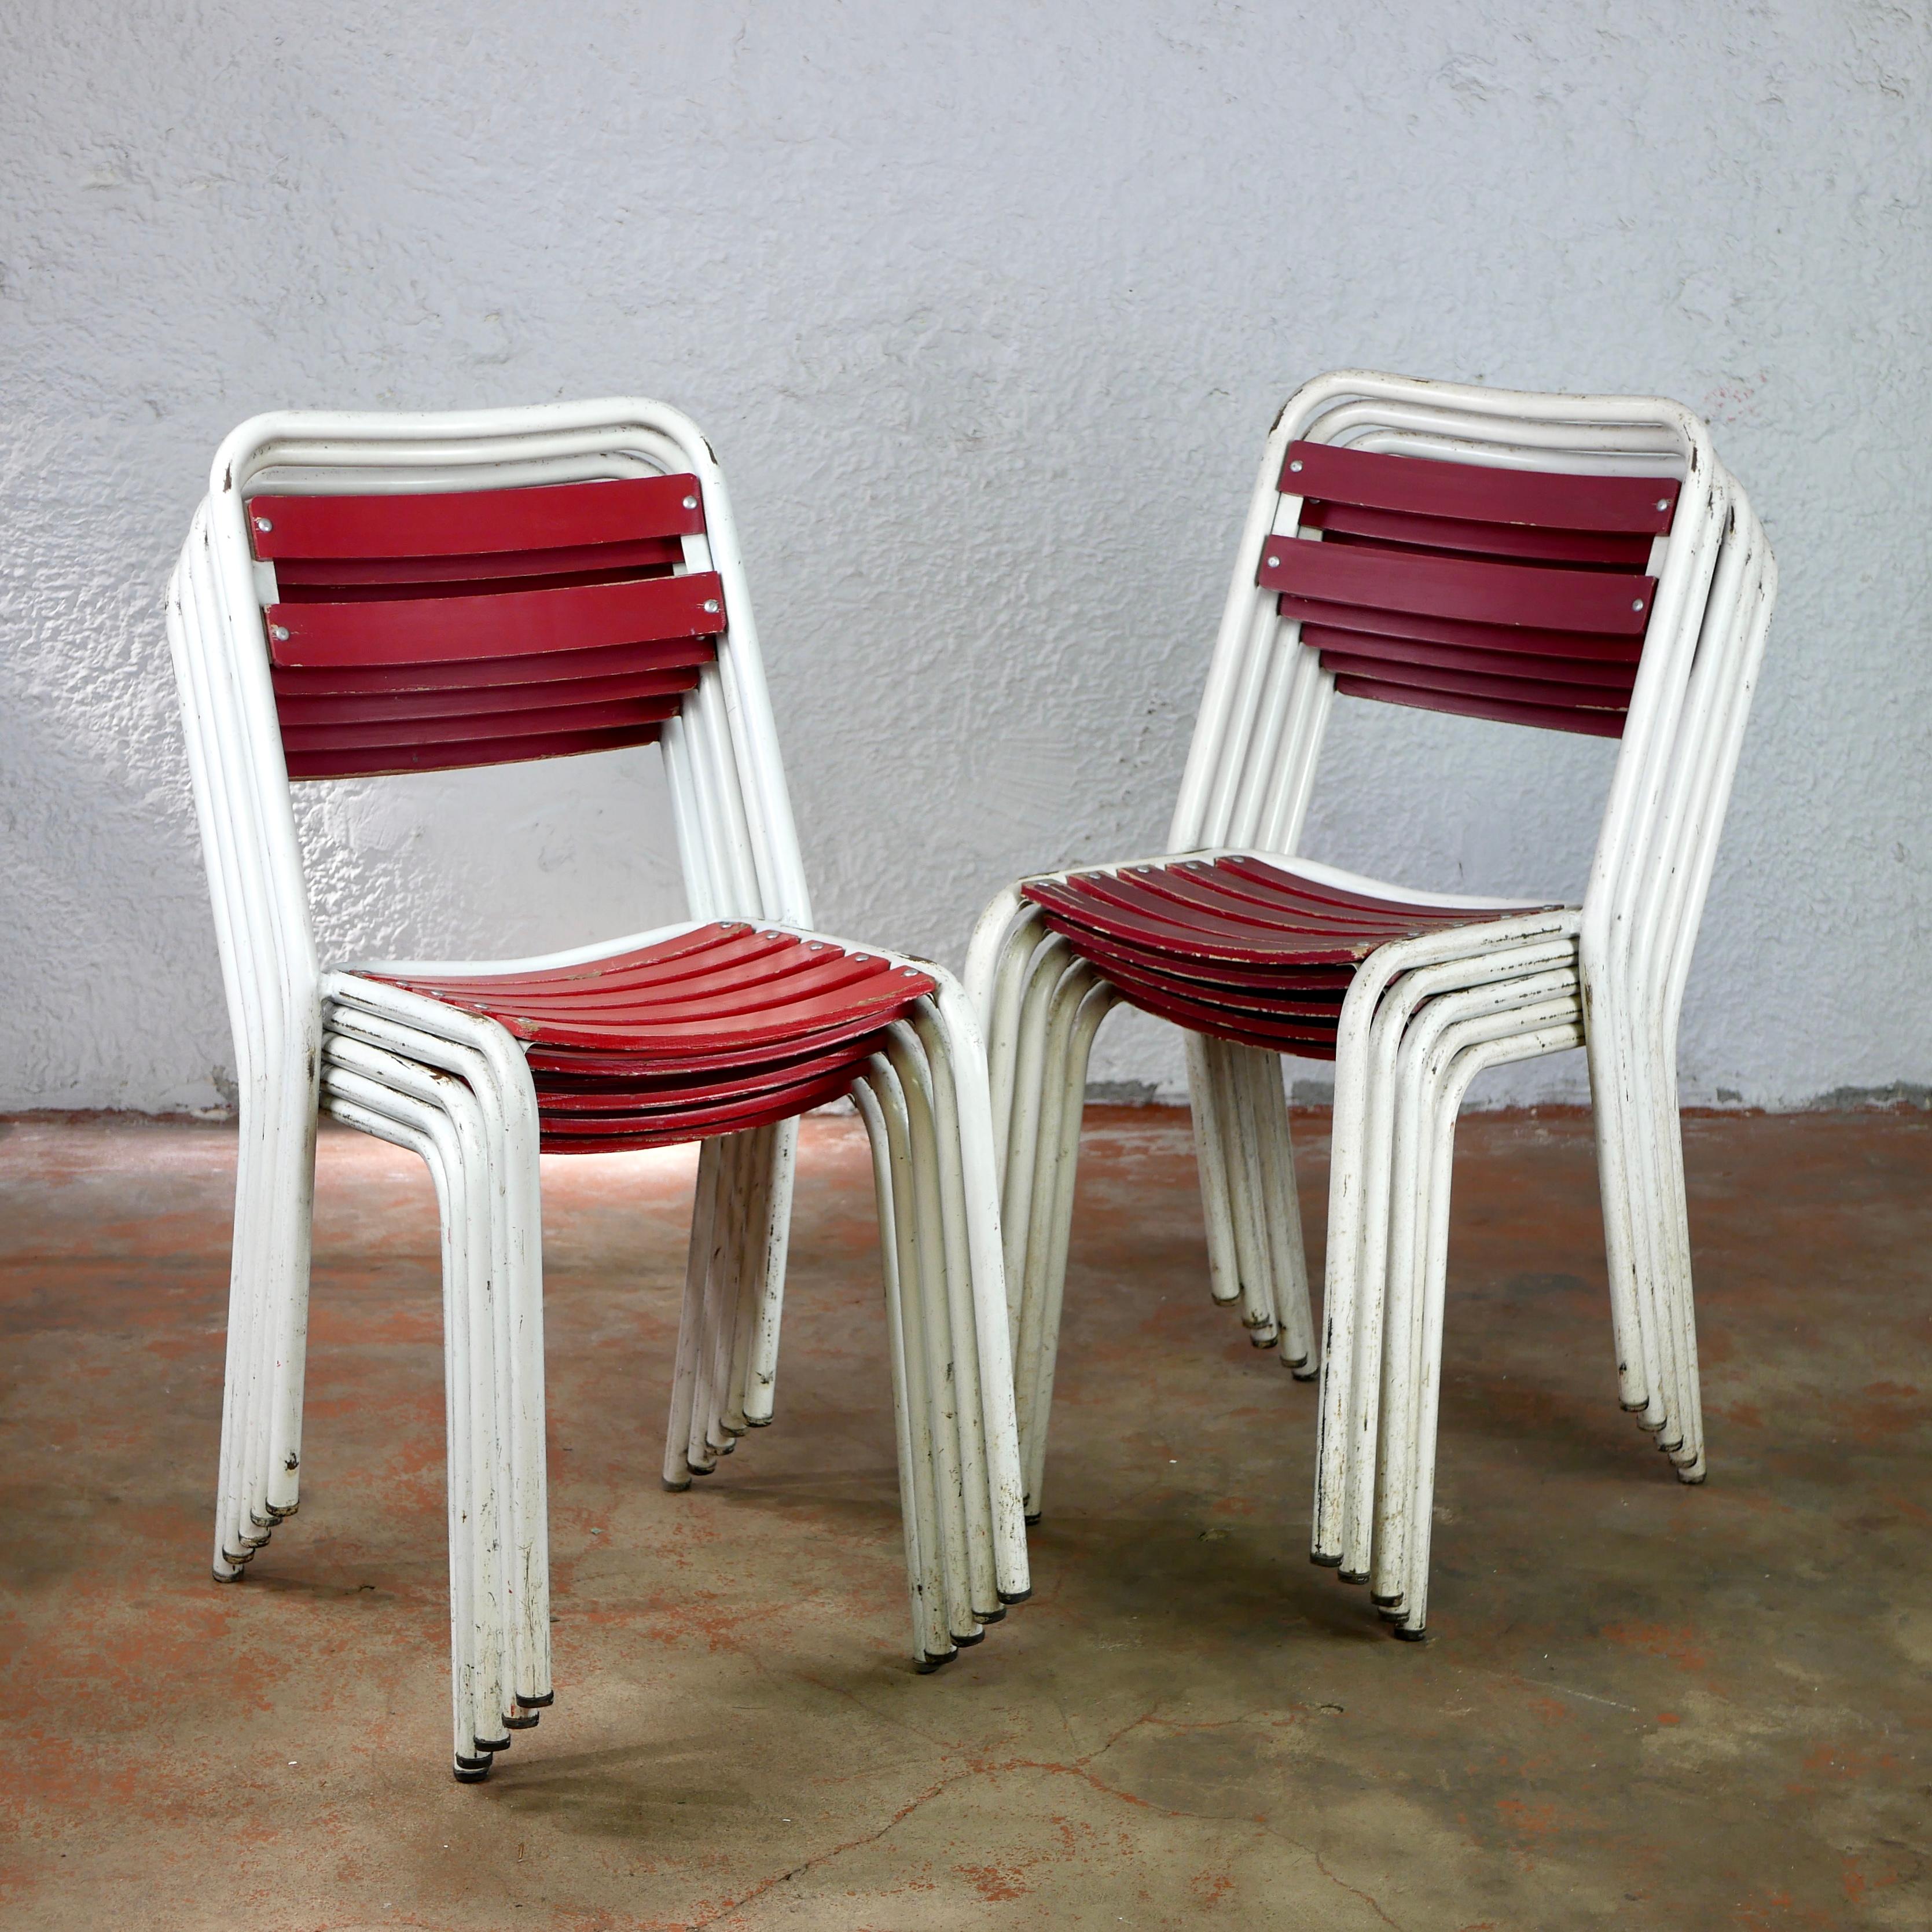 Colorful and iconic T2 chairs by Tolix, design Xavier Pauchard, made in France in the 1950s.
Metal structure, wooden seating and backrest.
5 burgundy chairs / 5 red (burgundy backrest) chairs.
Adult size chairs.
Good condition, nice patina.